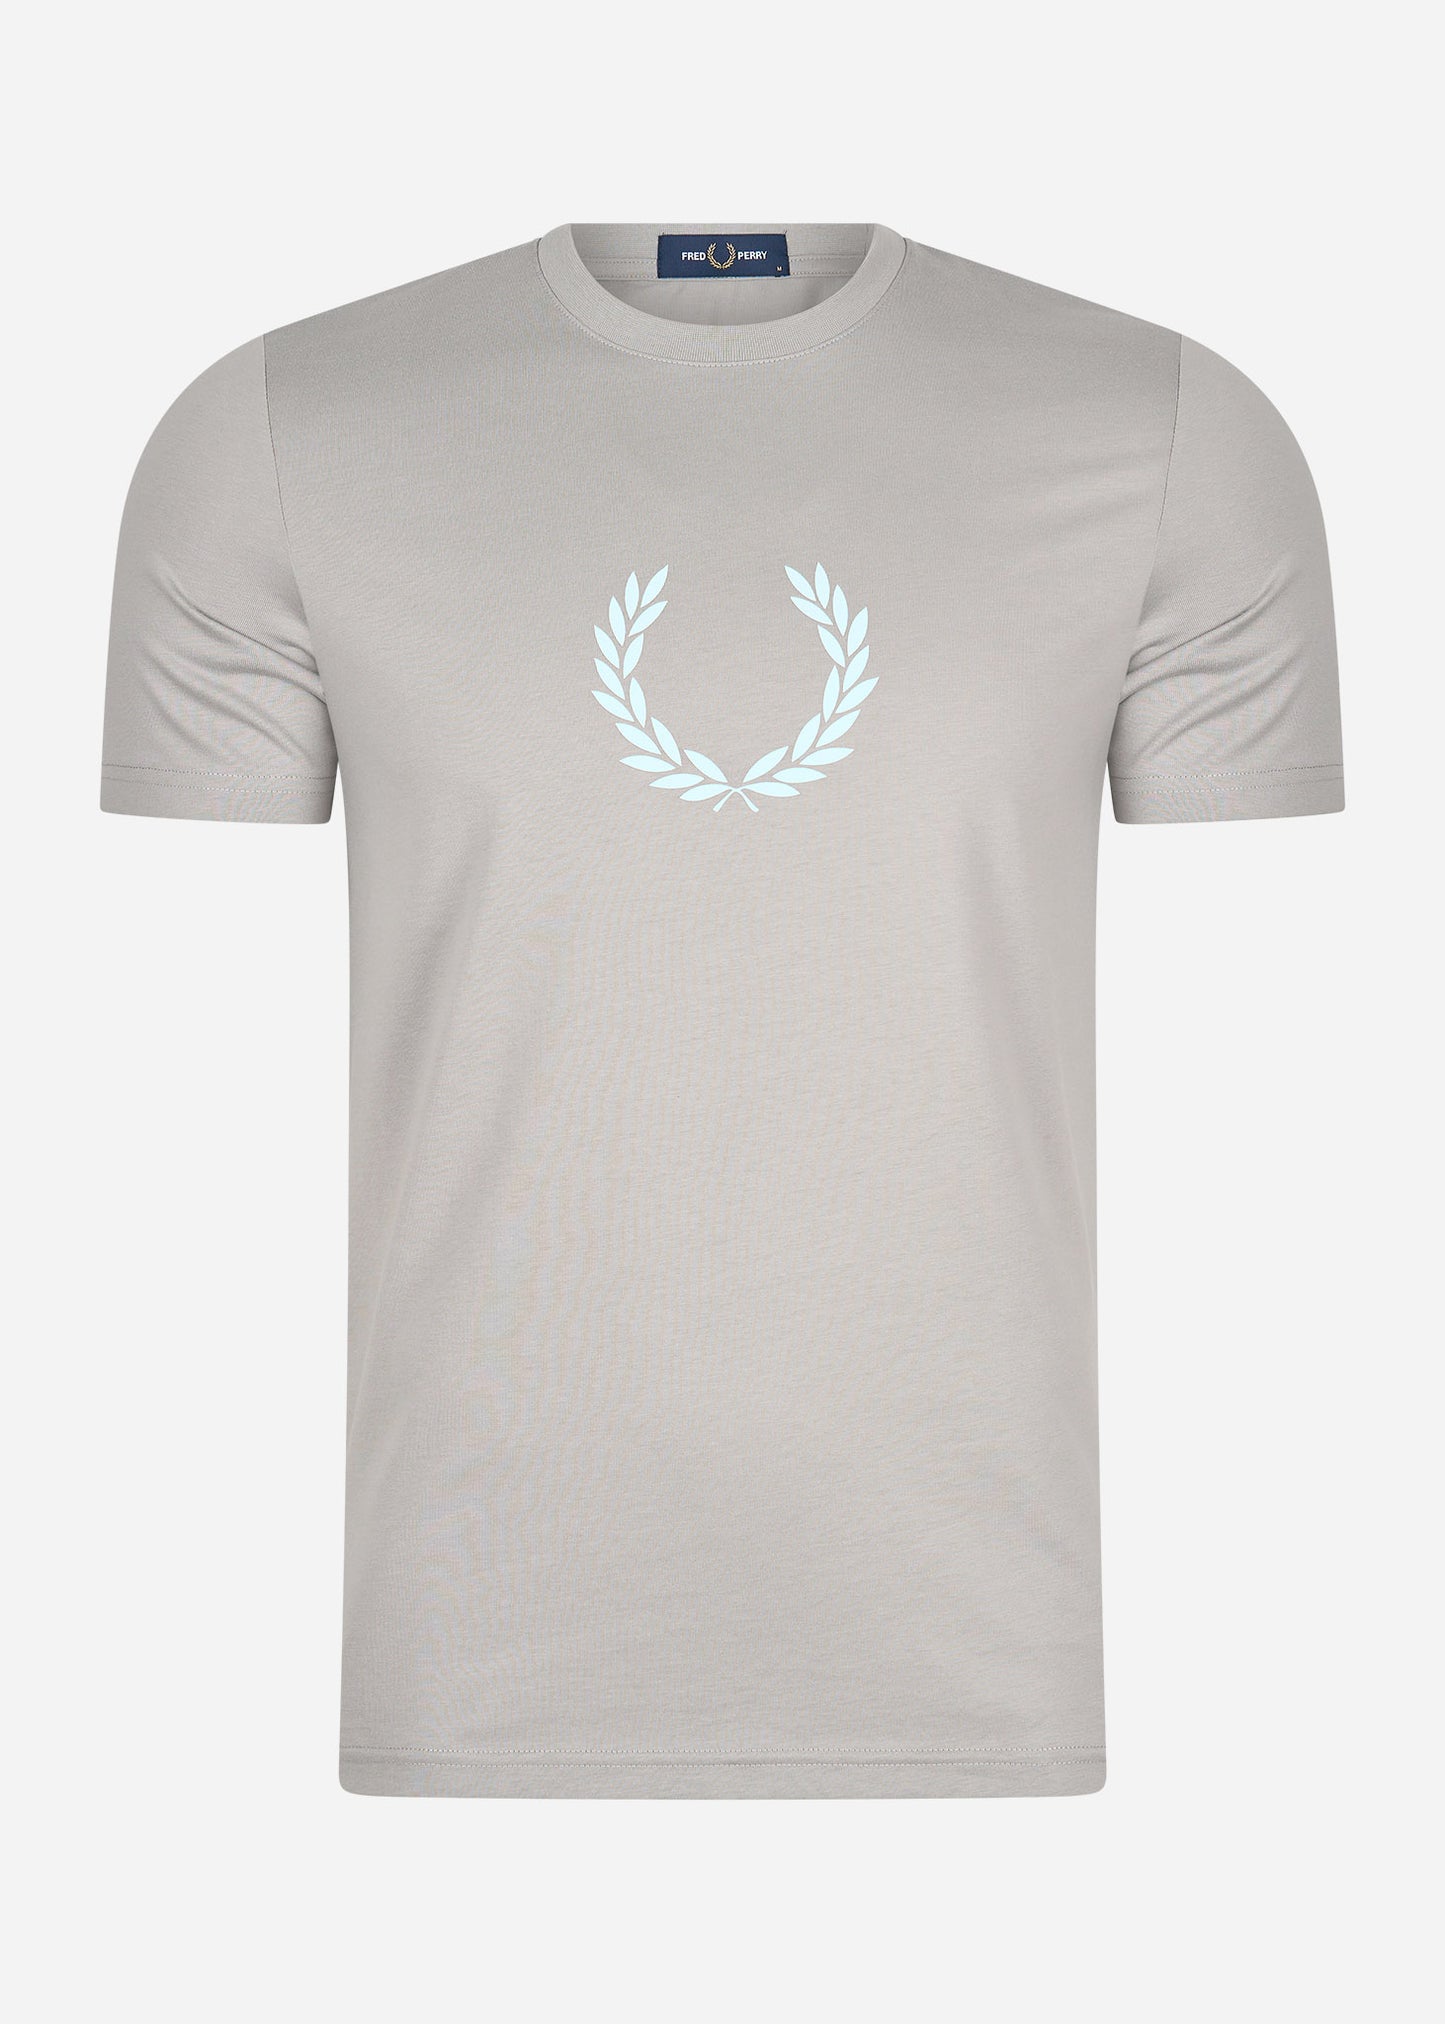 Fred Perry T-shirts  Laurel wreath graphic t-shirt - limestone 